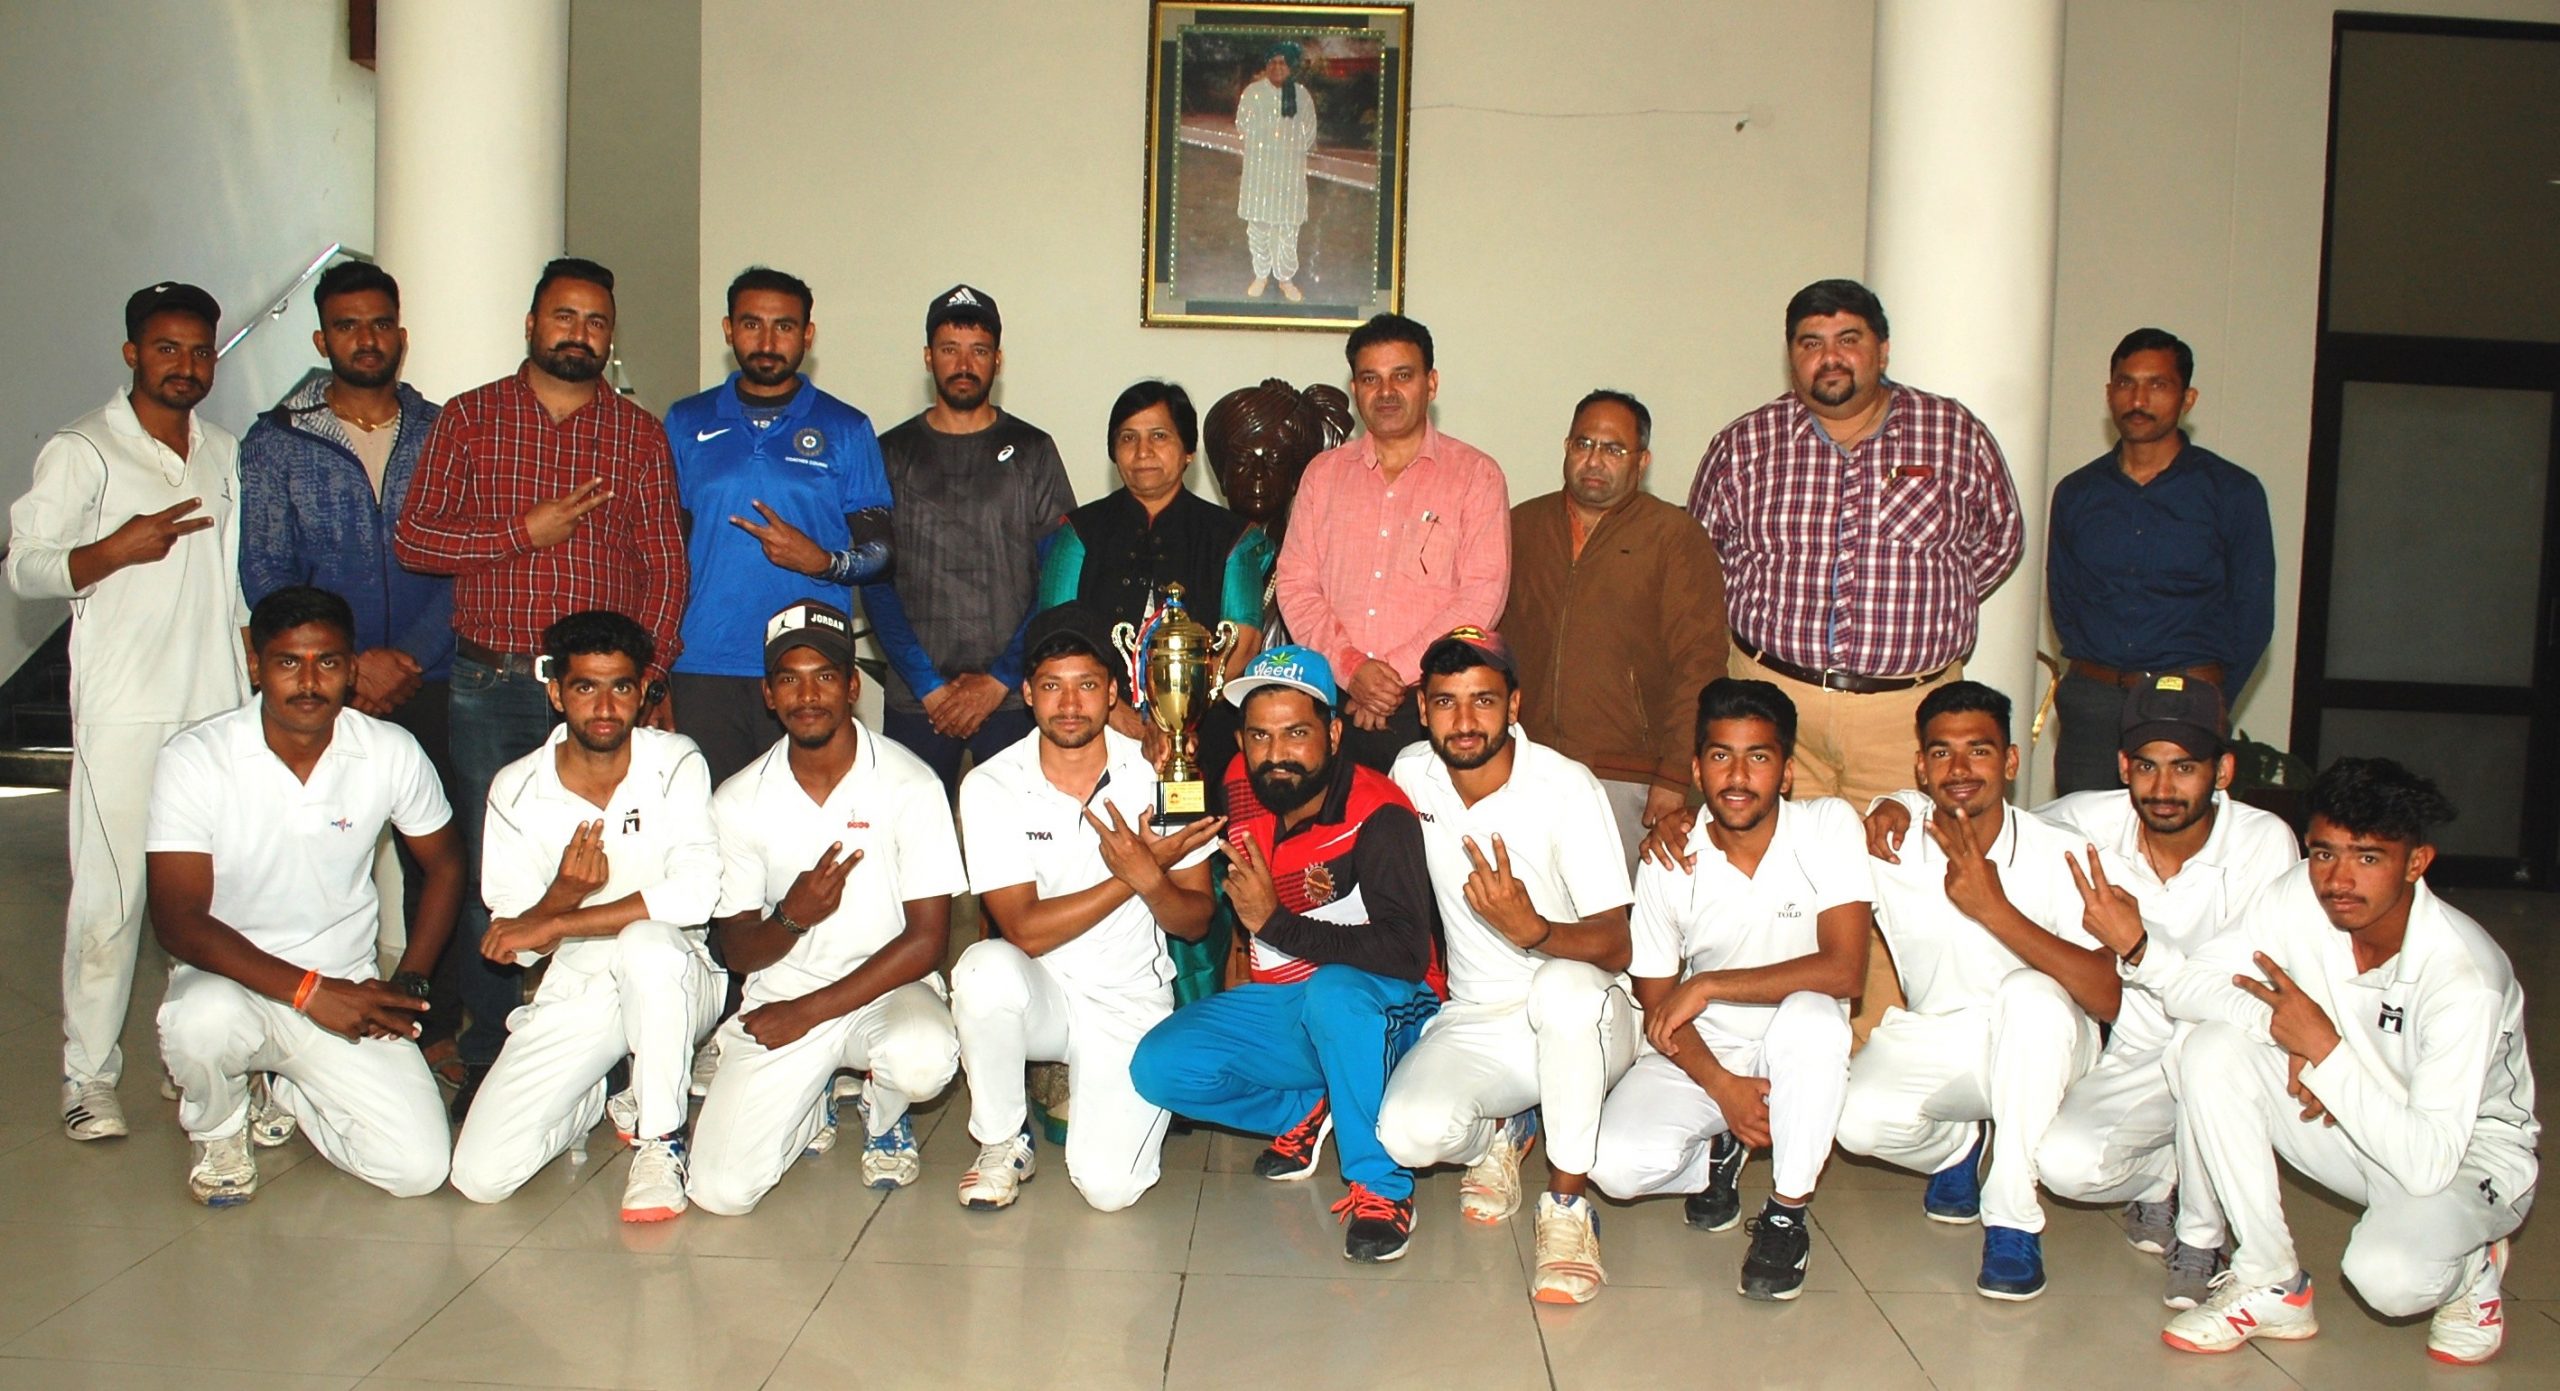 JCD National Cricket Academy team won the victory in Bhiwani